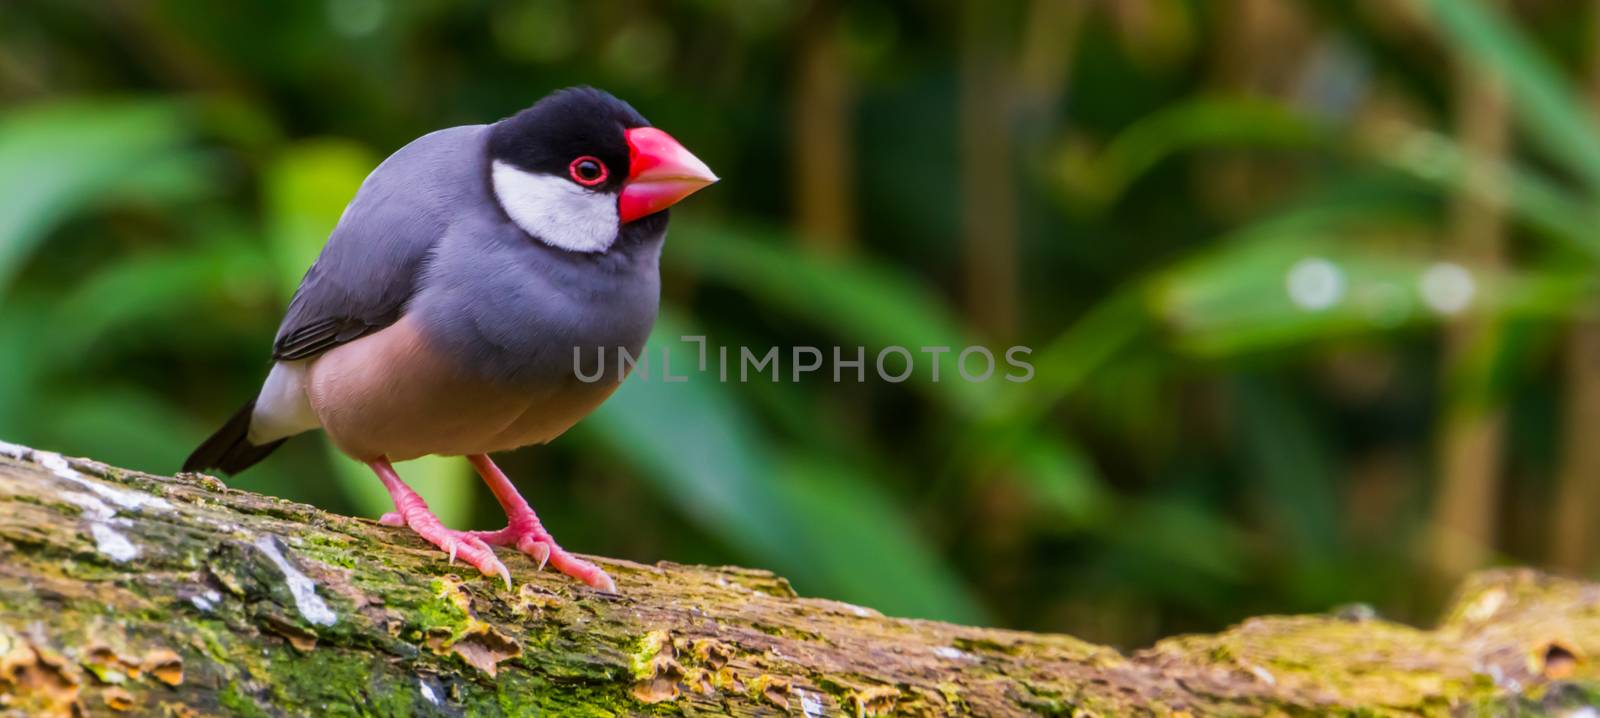 Java rice sparrow, popular tropical bird from the java island of Indonesia, popular aviary pet in aviculture, Endangered bird specie by charlottebleijenberg